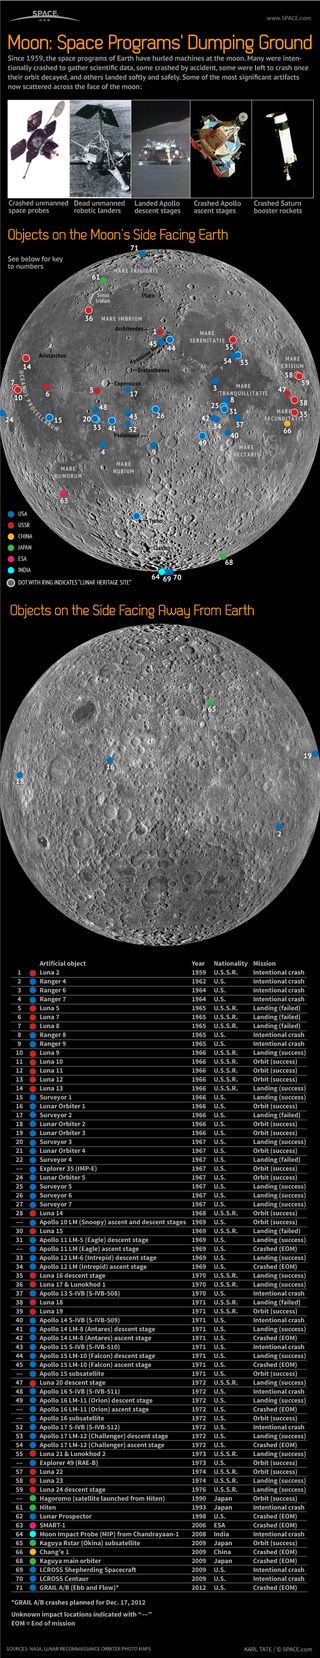 The remains of at least 71 space vehicles litter the surface of the moon. See how the moon is a dumping ground for spacecraft in this Space.com infographic.